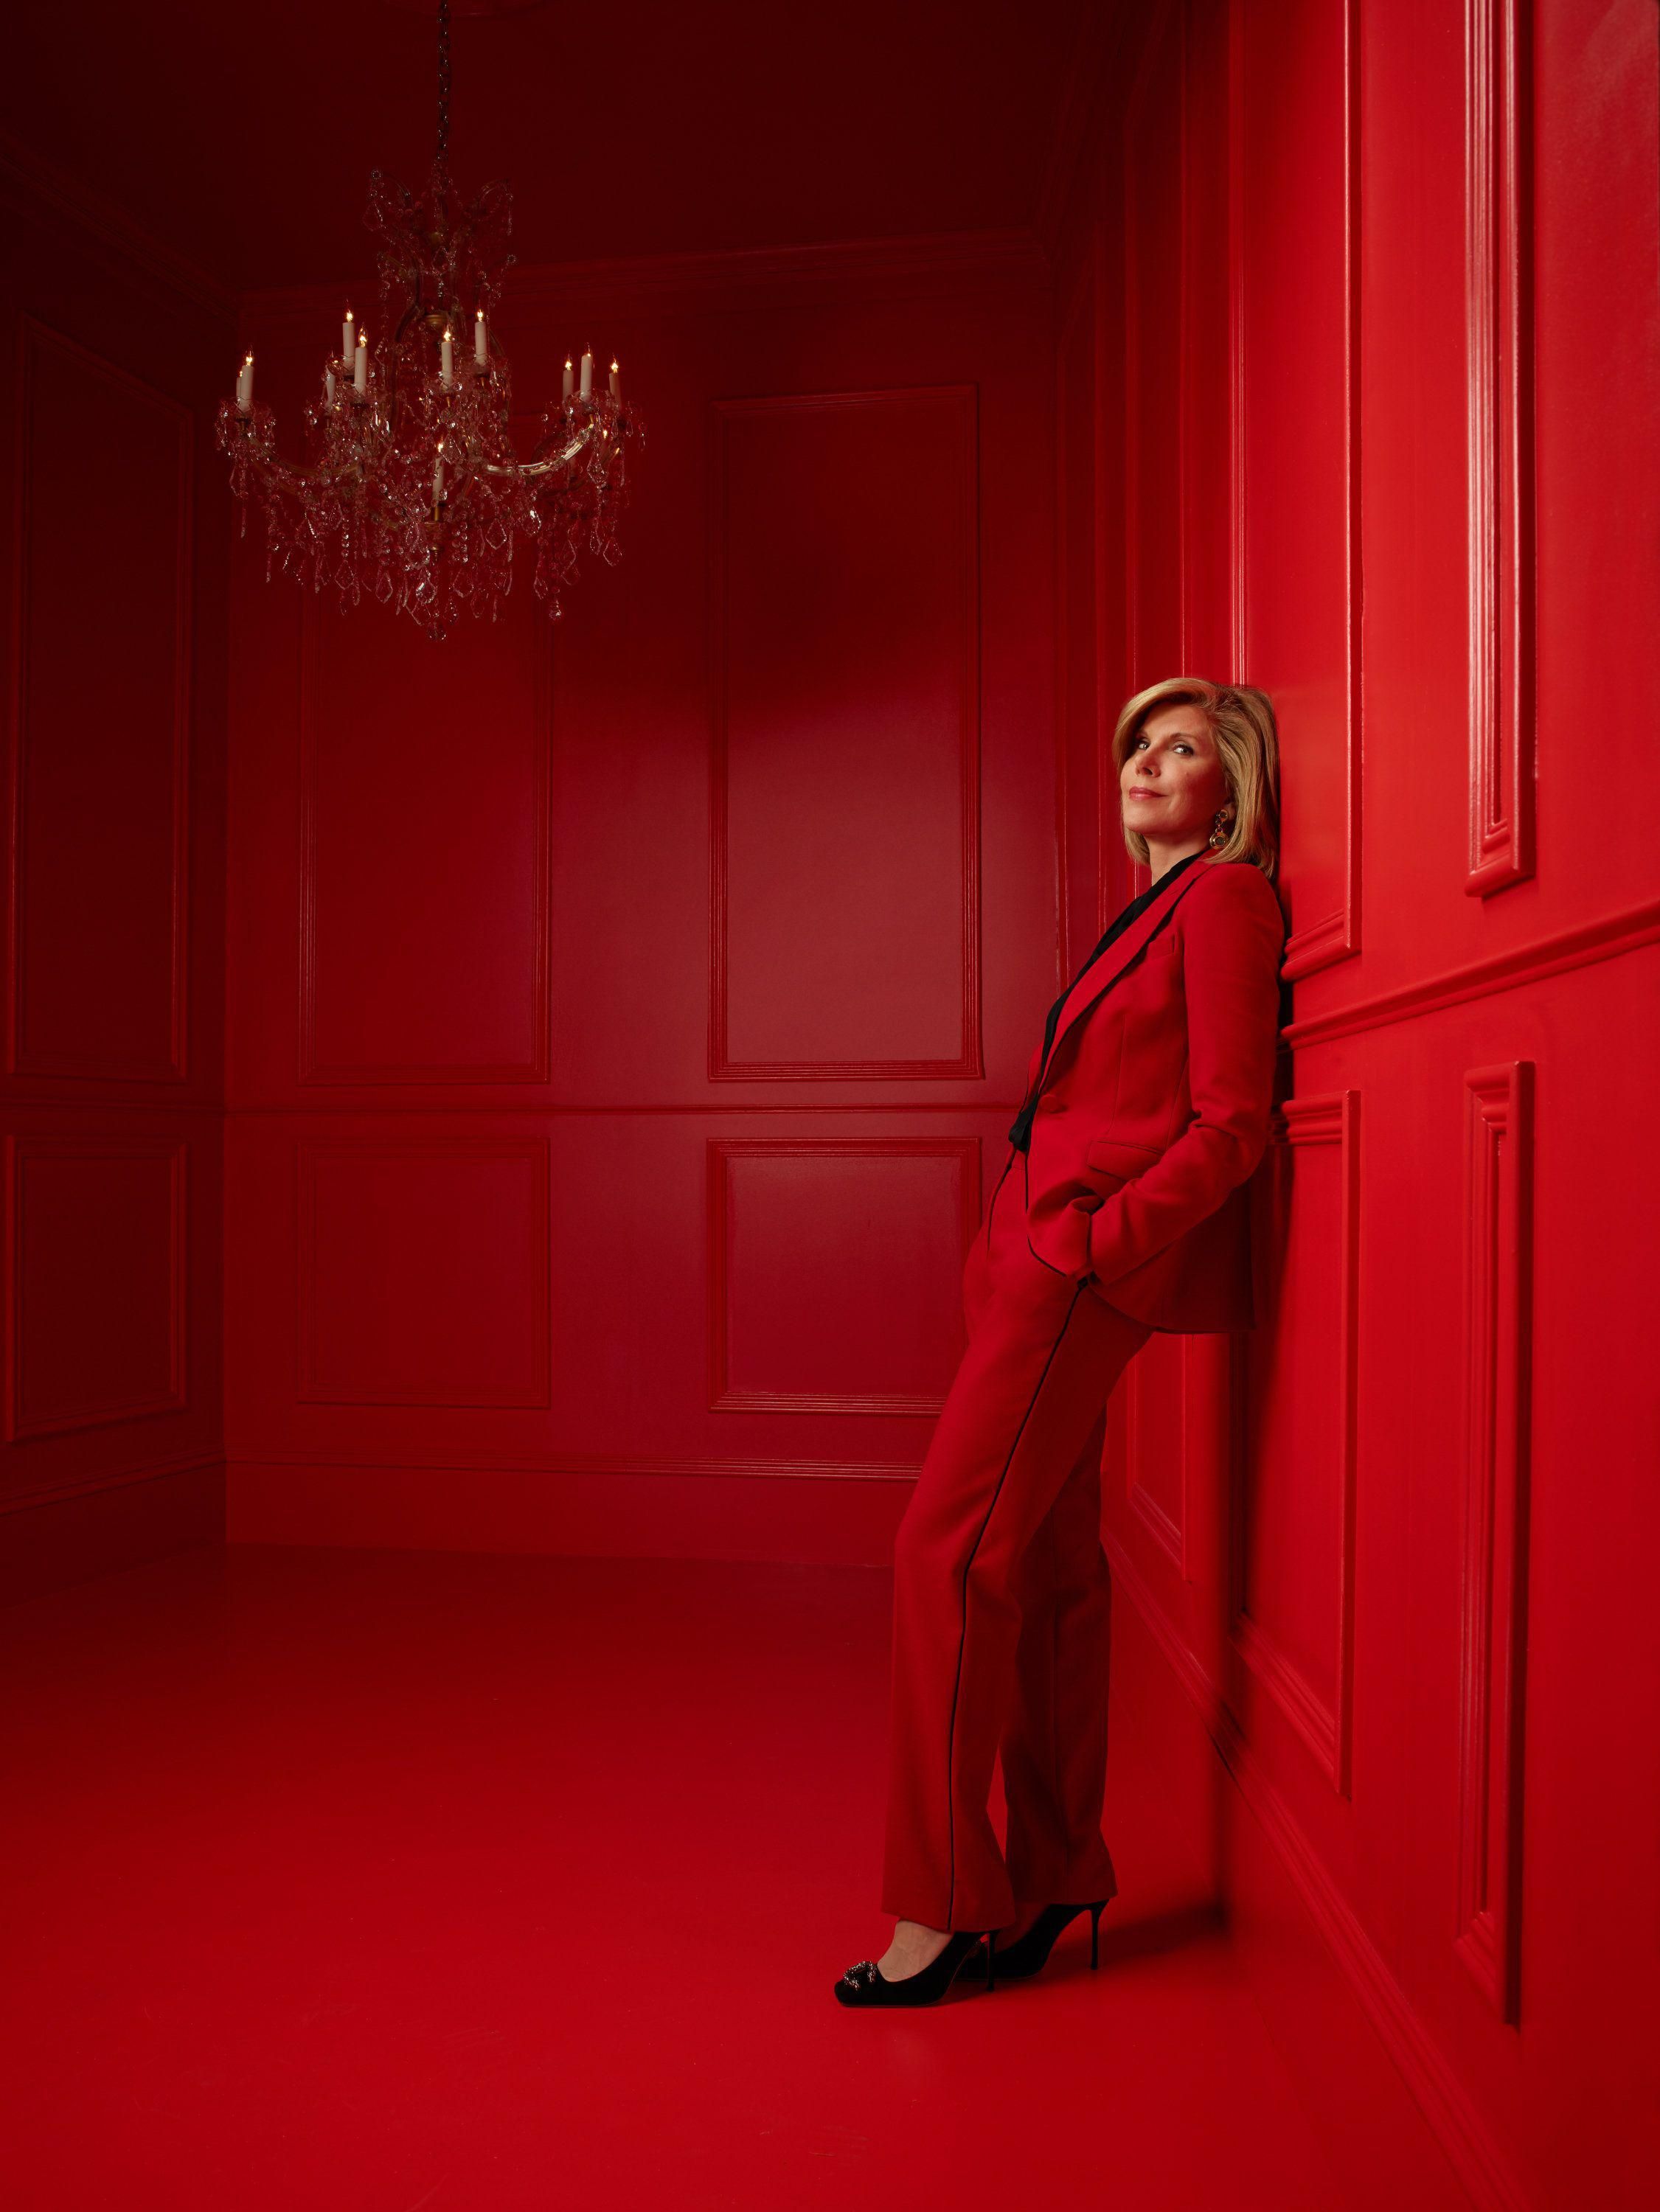 Christine Baranski wears a red suit as she leans against the wall of a matching red room